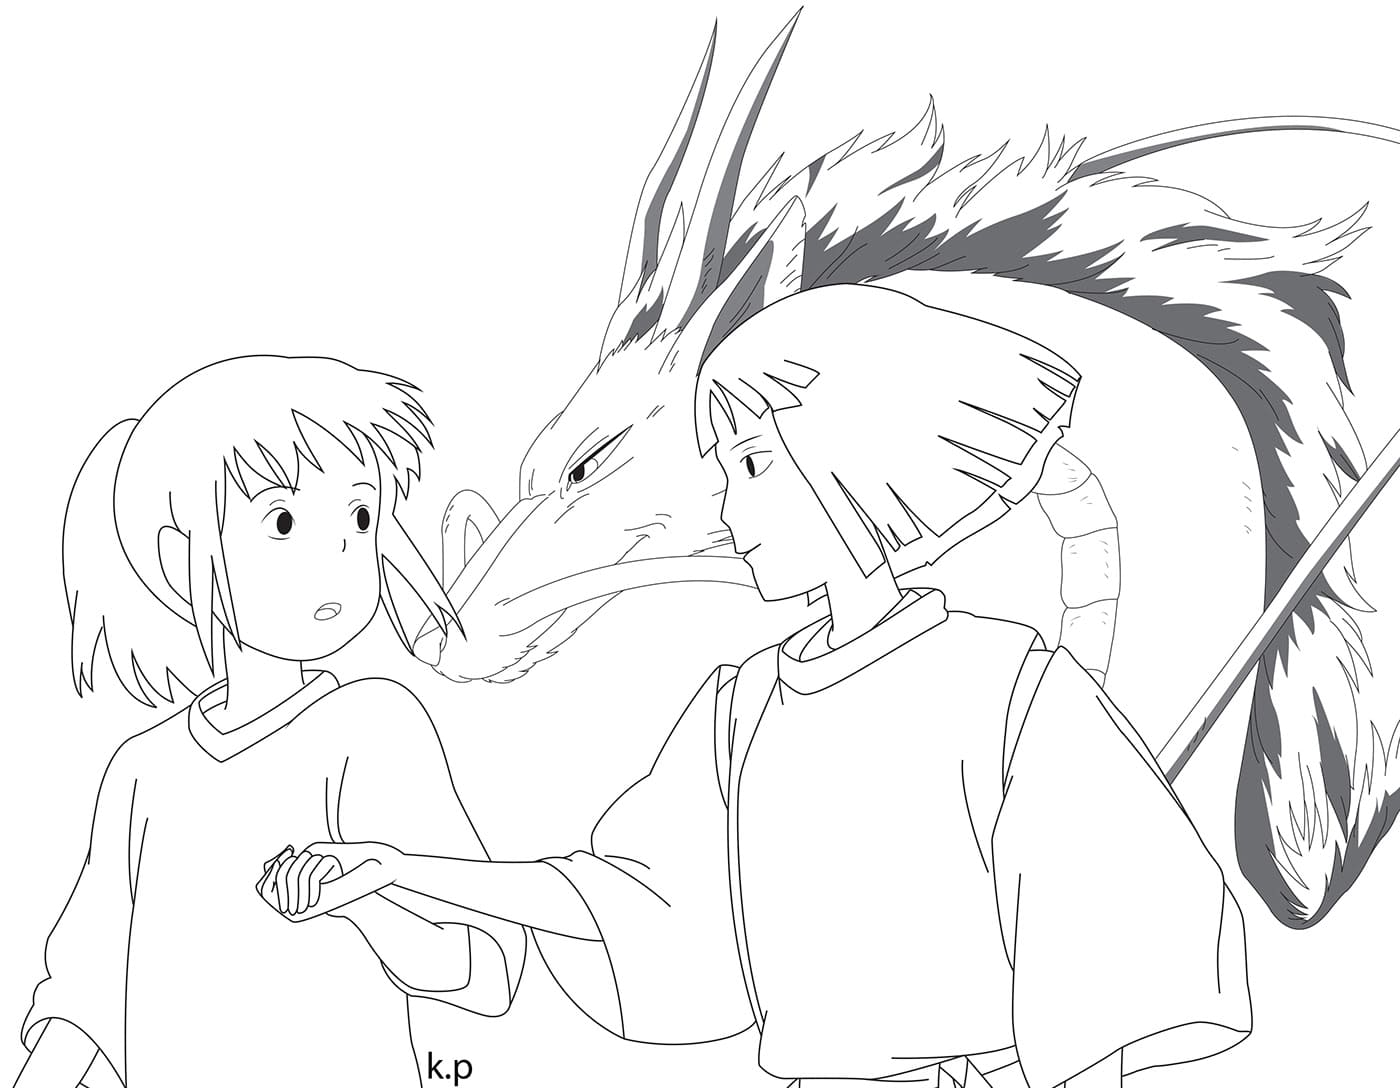 Spirited away coloring pages